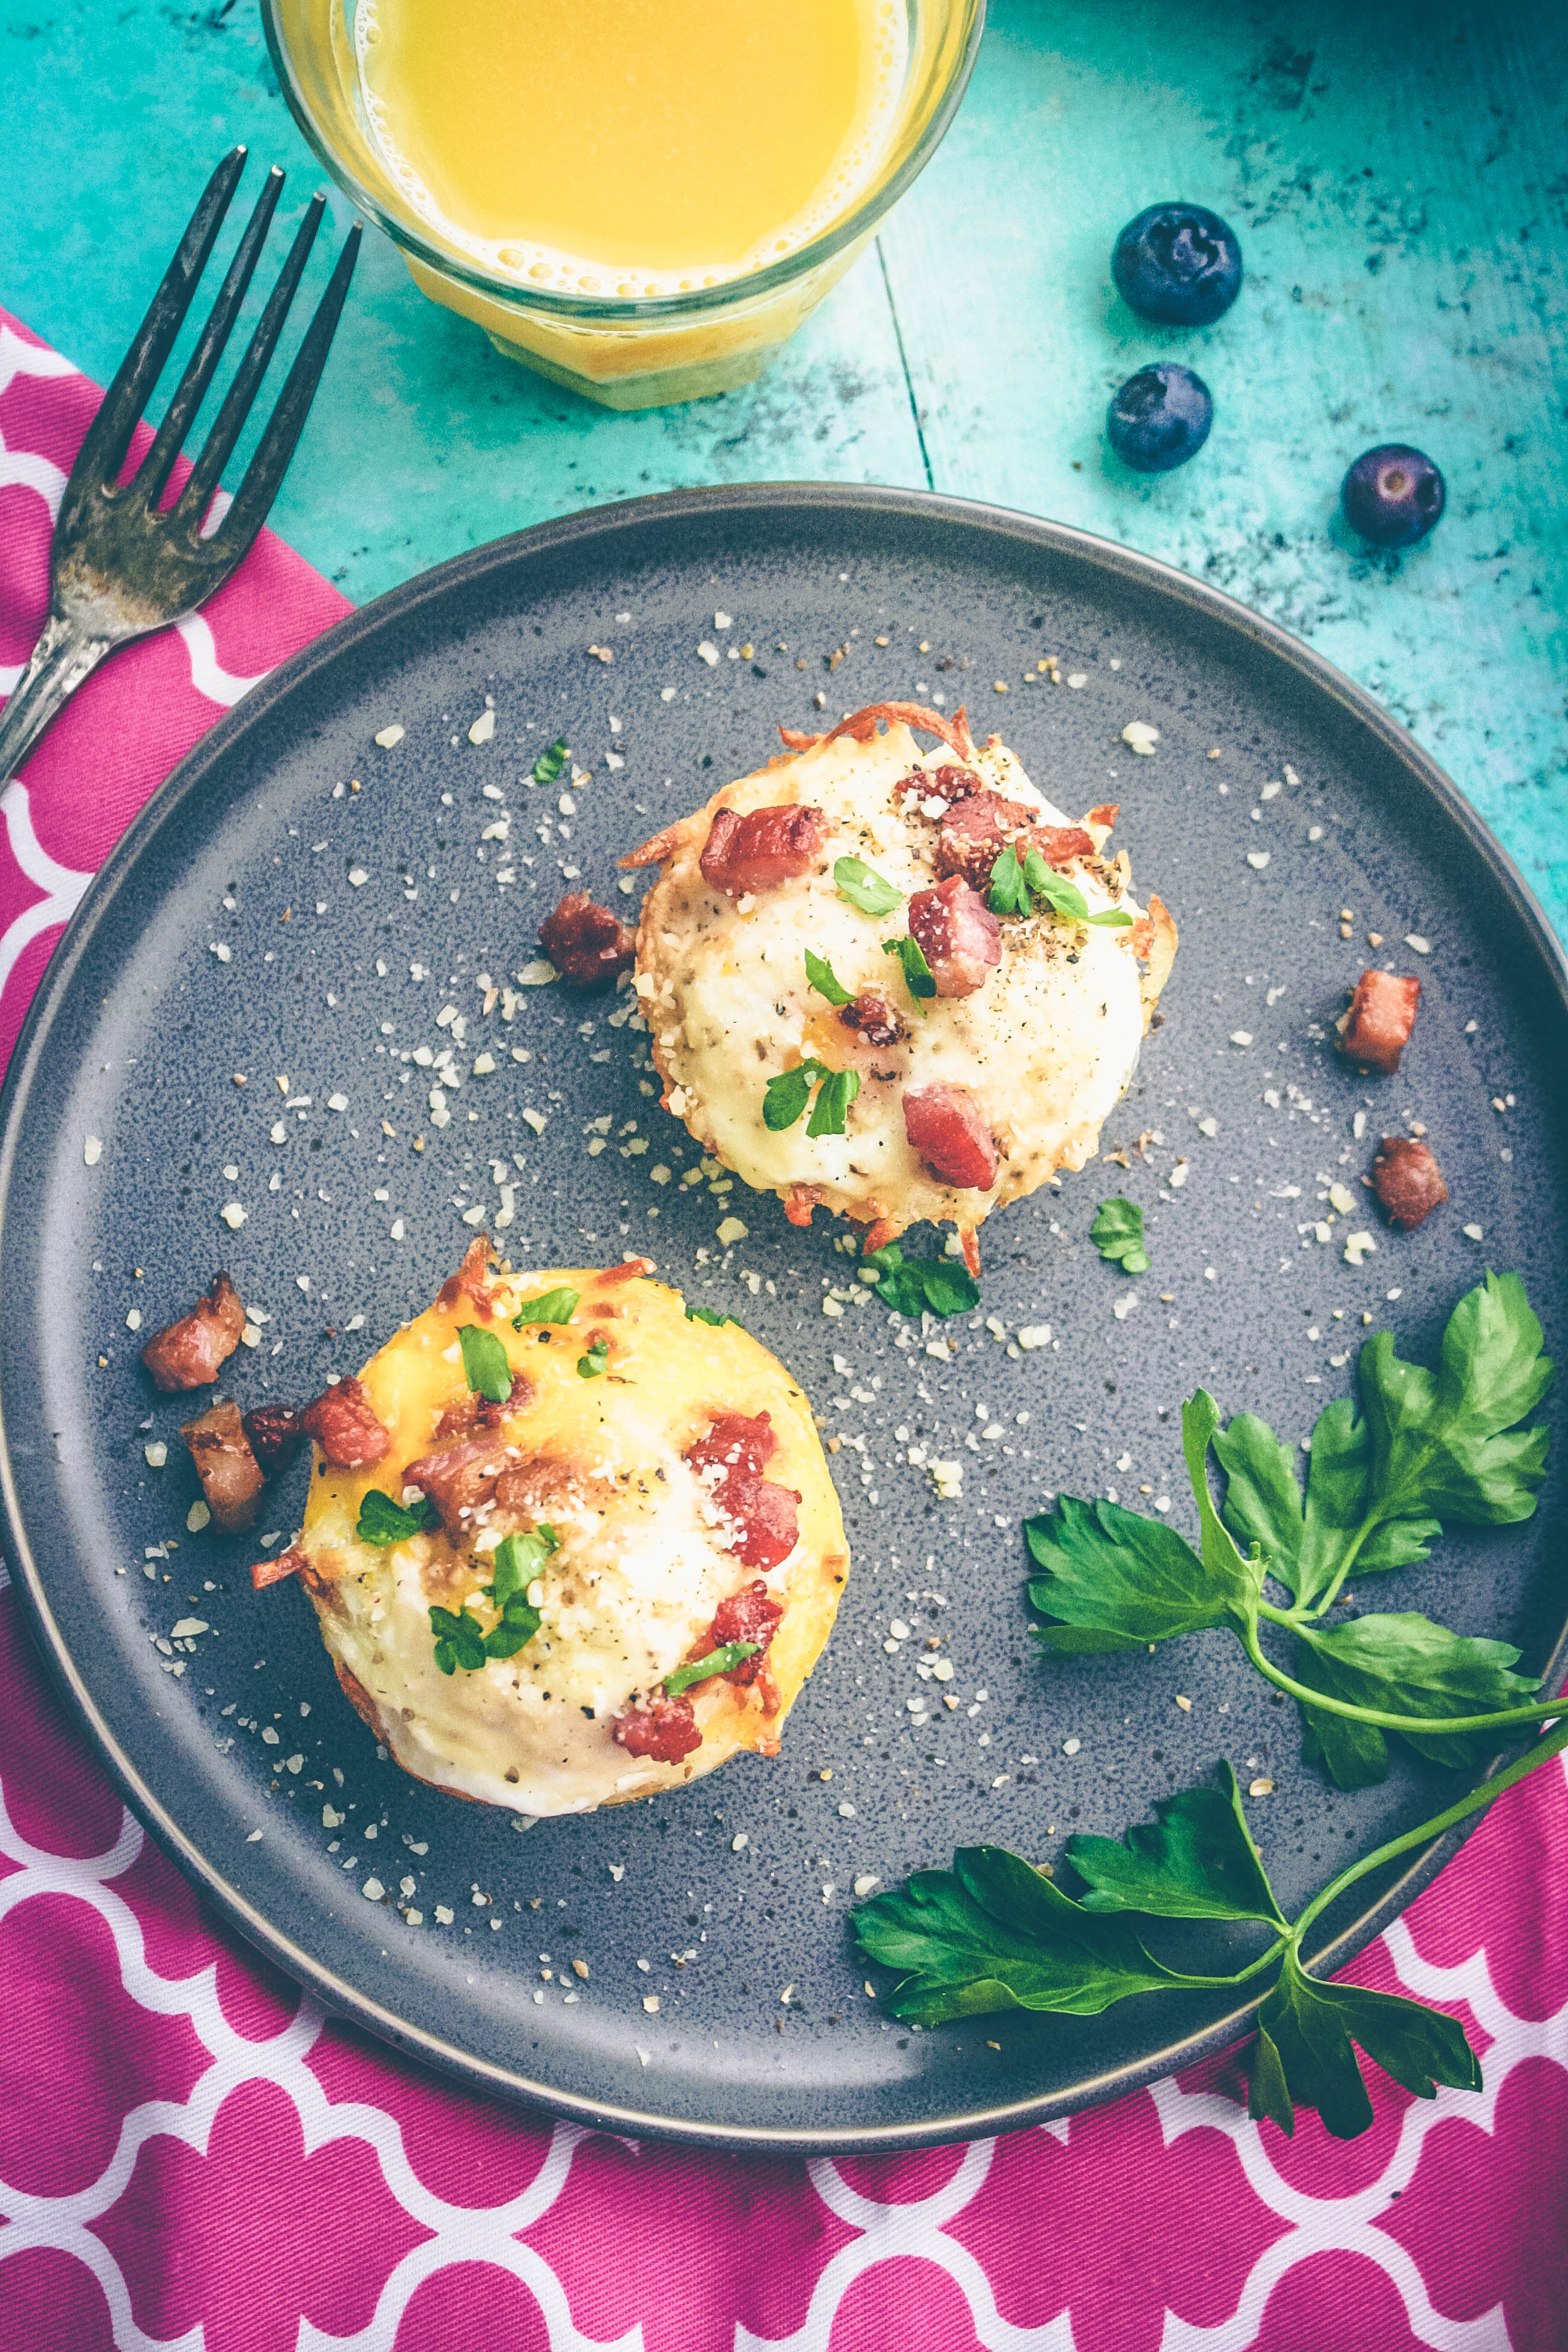 Baked Hash Brown Egg Cups with Parmesan and Pancetta are delicious and fun for breakfast. Baked Hash Brown Egg Cups with Parmesan and Pancetta make a great breakfast dish.